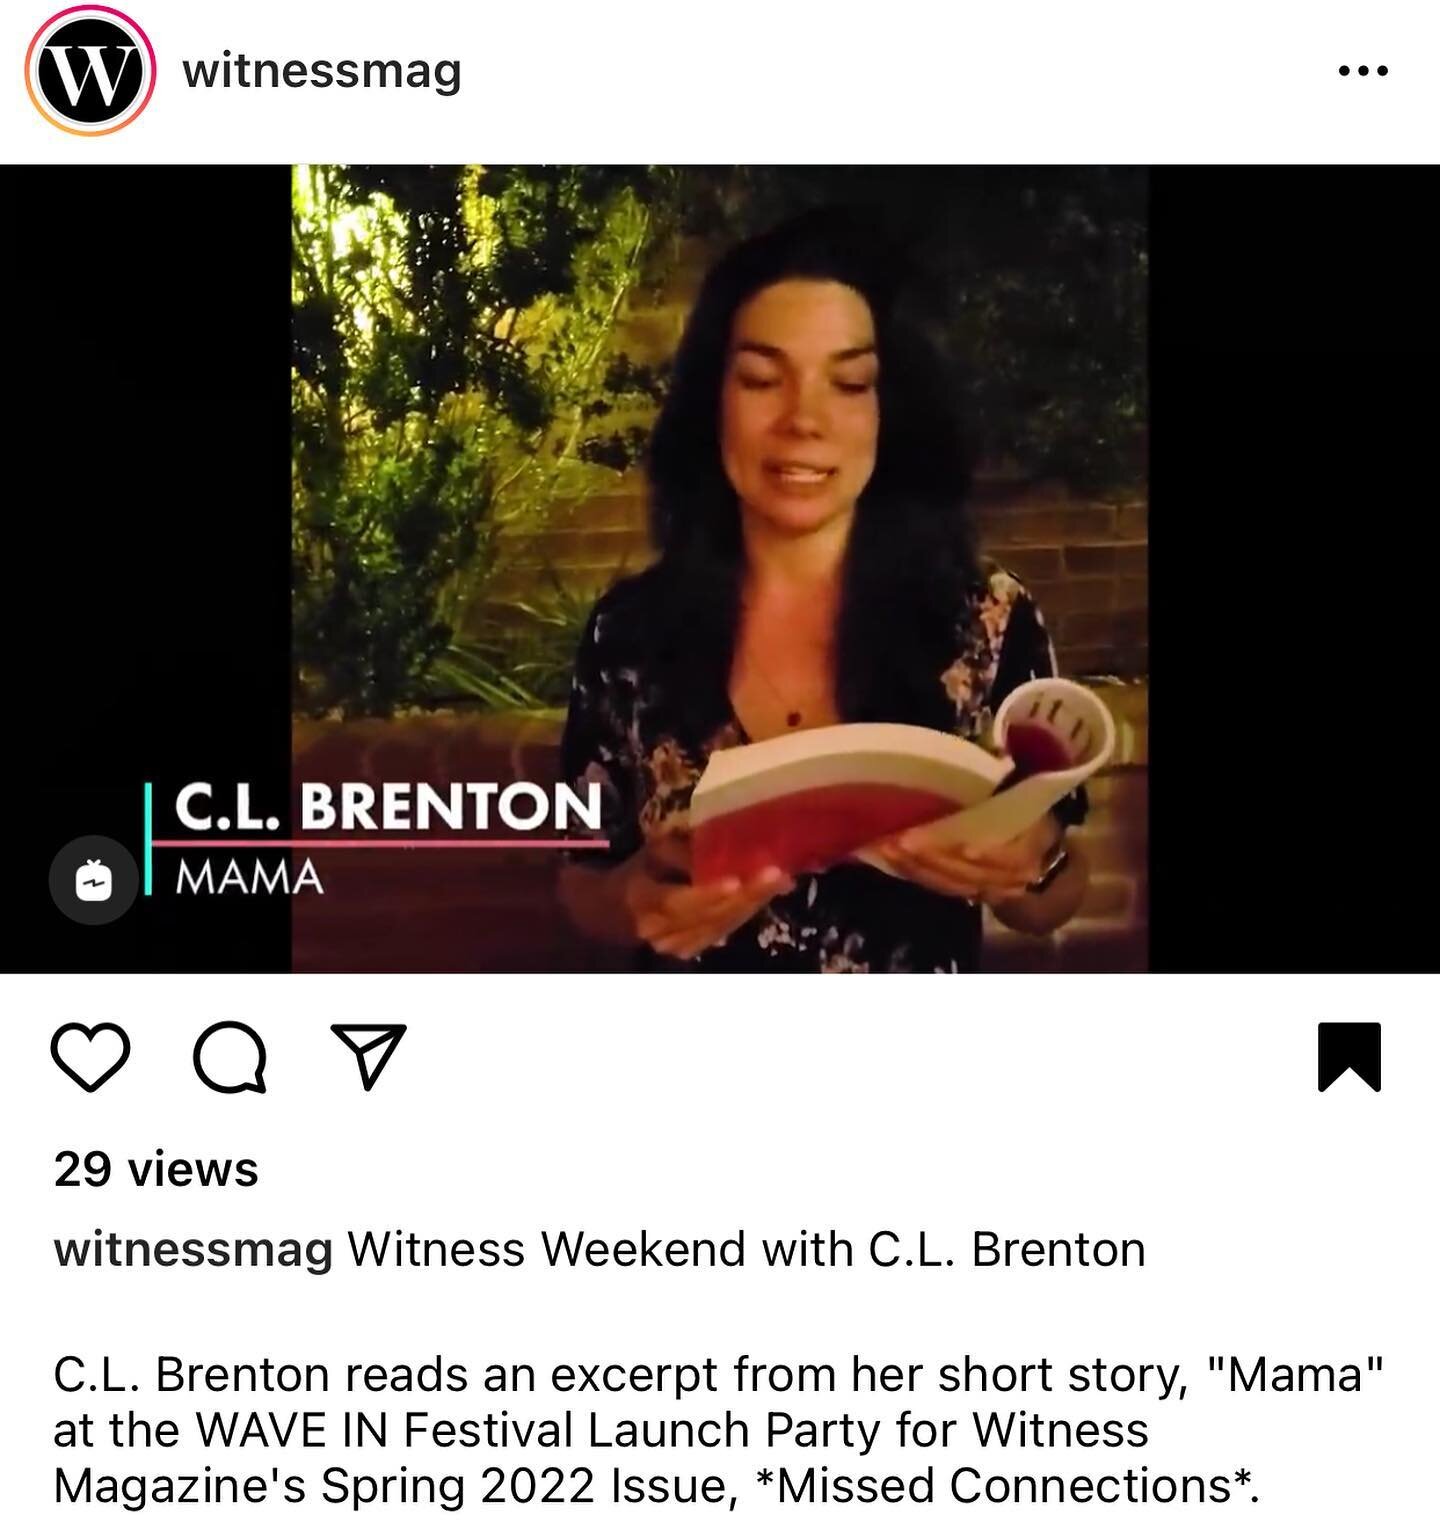 Thanks @witnessmag for the nice words and for featuring my reading. Check it on their feed &mdash; https://www.instagram.com/tv/CeM4X9-MwXk/?igshid=YmMyMTA2M2Y=